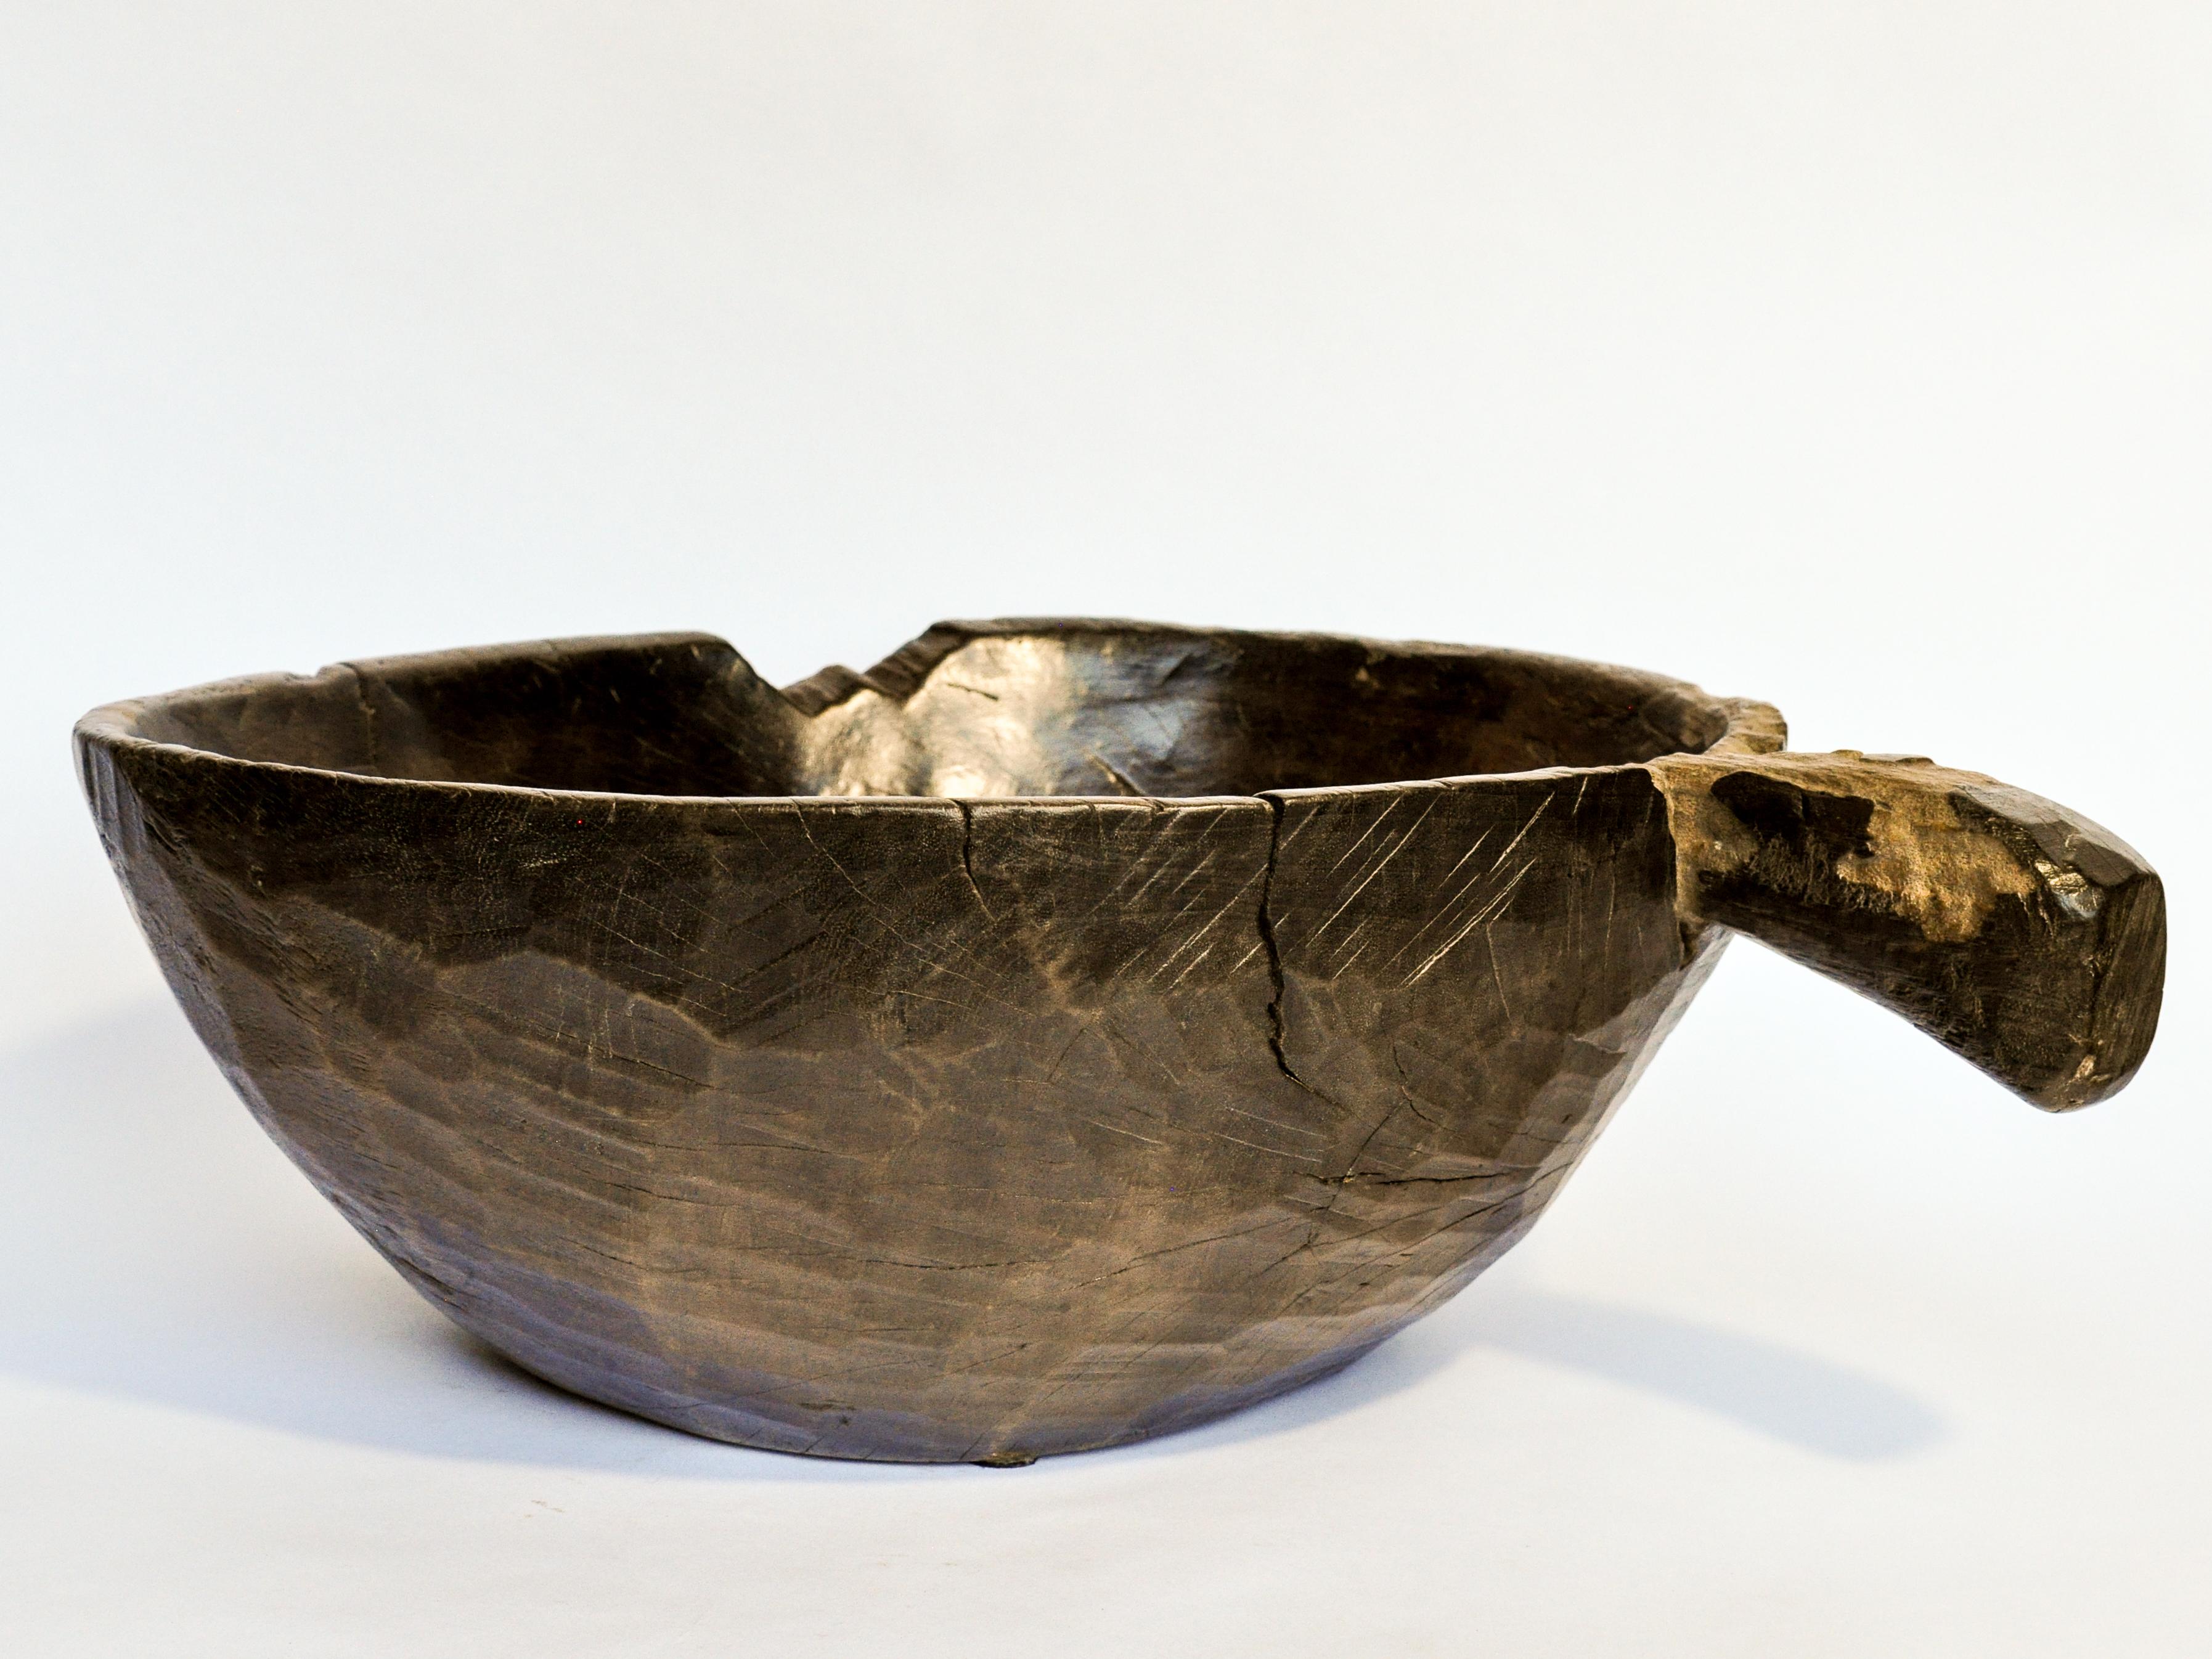 Tribal Old Hand Hewn Wooden Bowl with Handle from Sulawesi, Indonesia, Mid-20th Century